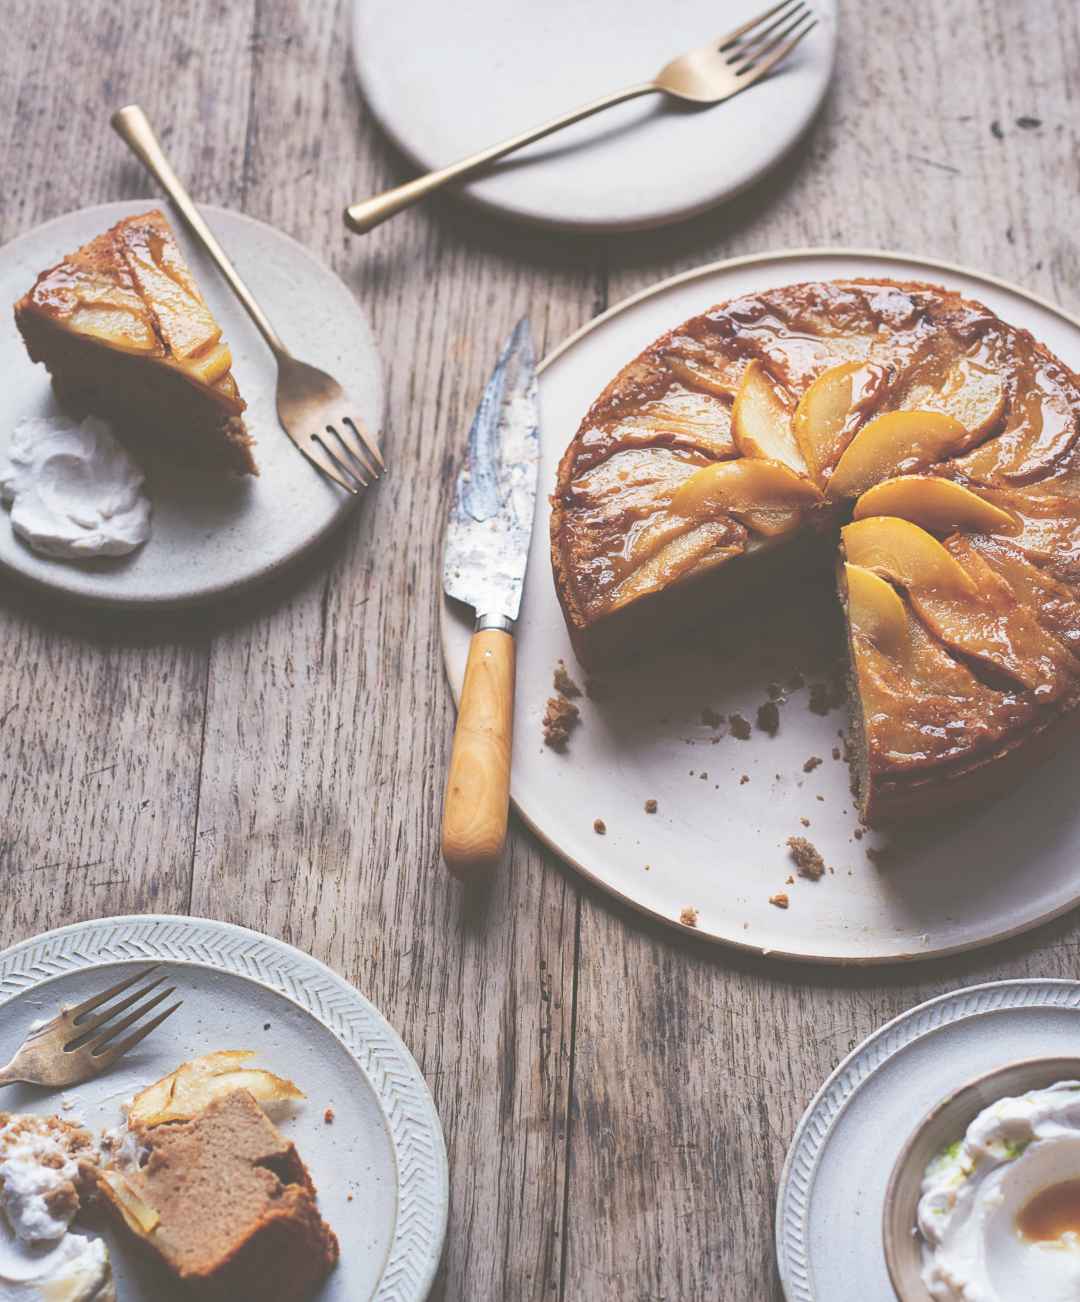 Upside-down pear cake - gluten-free, vegan and perfect with a cup of tea!